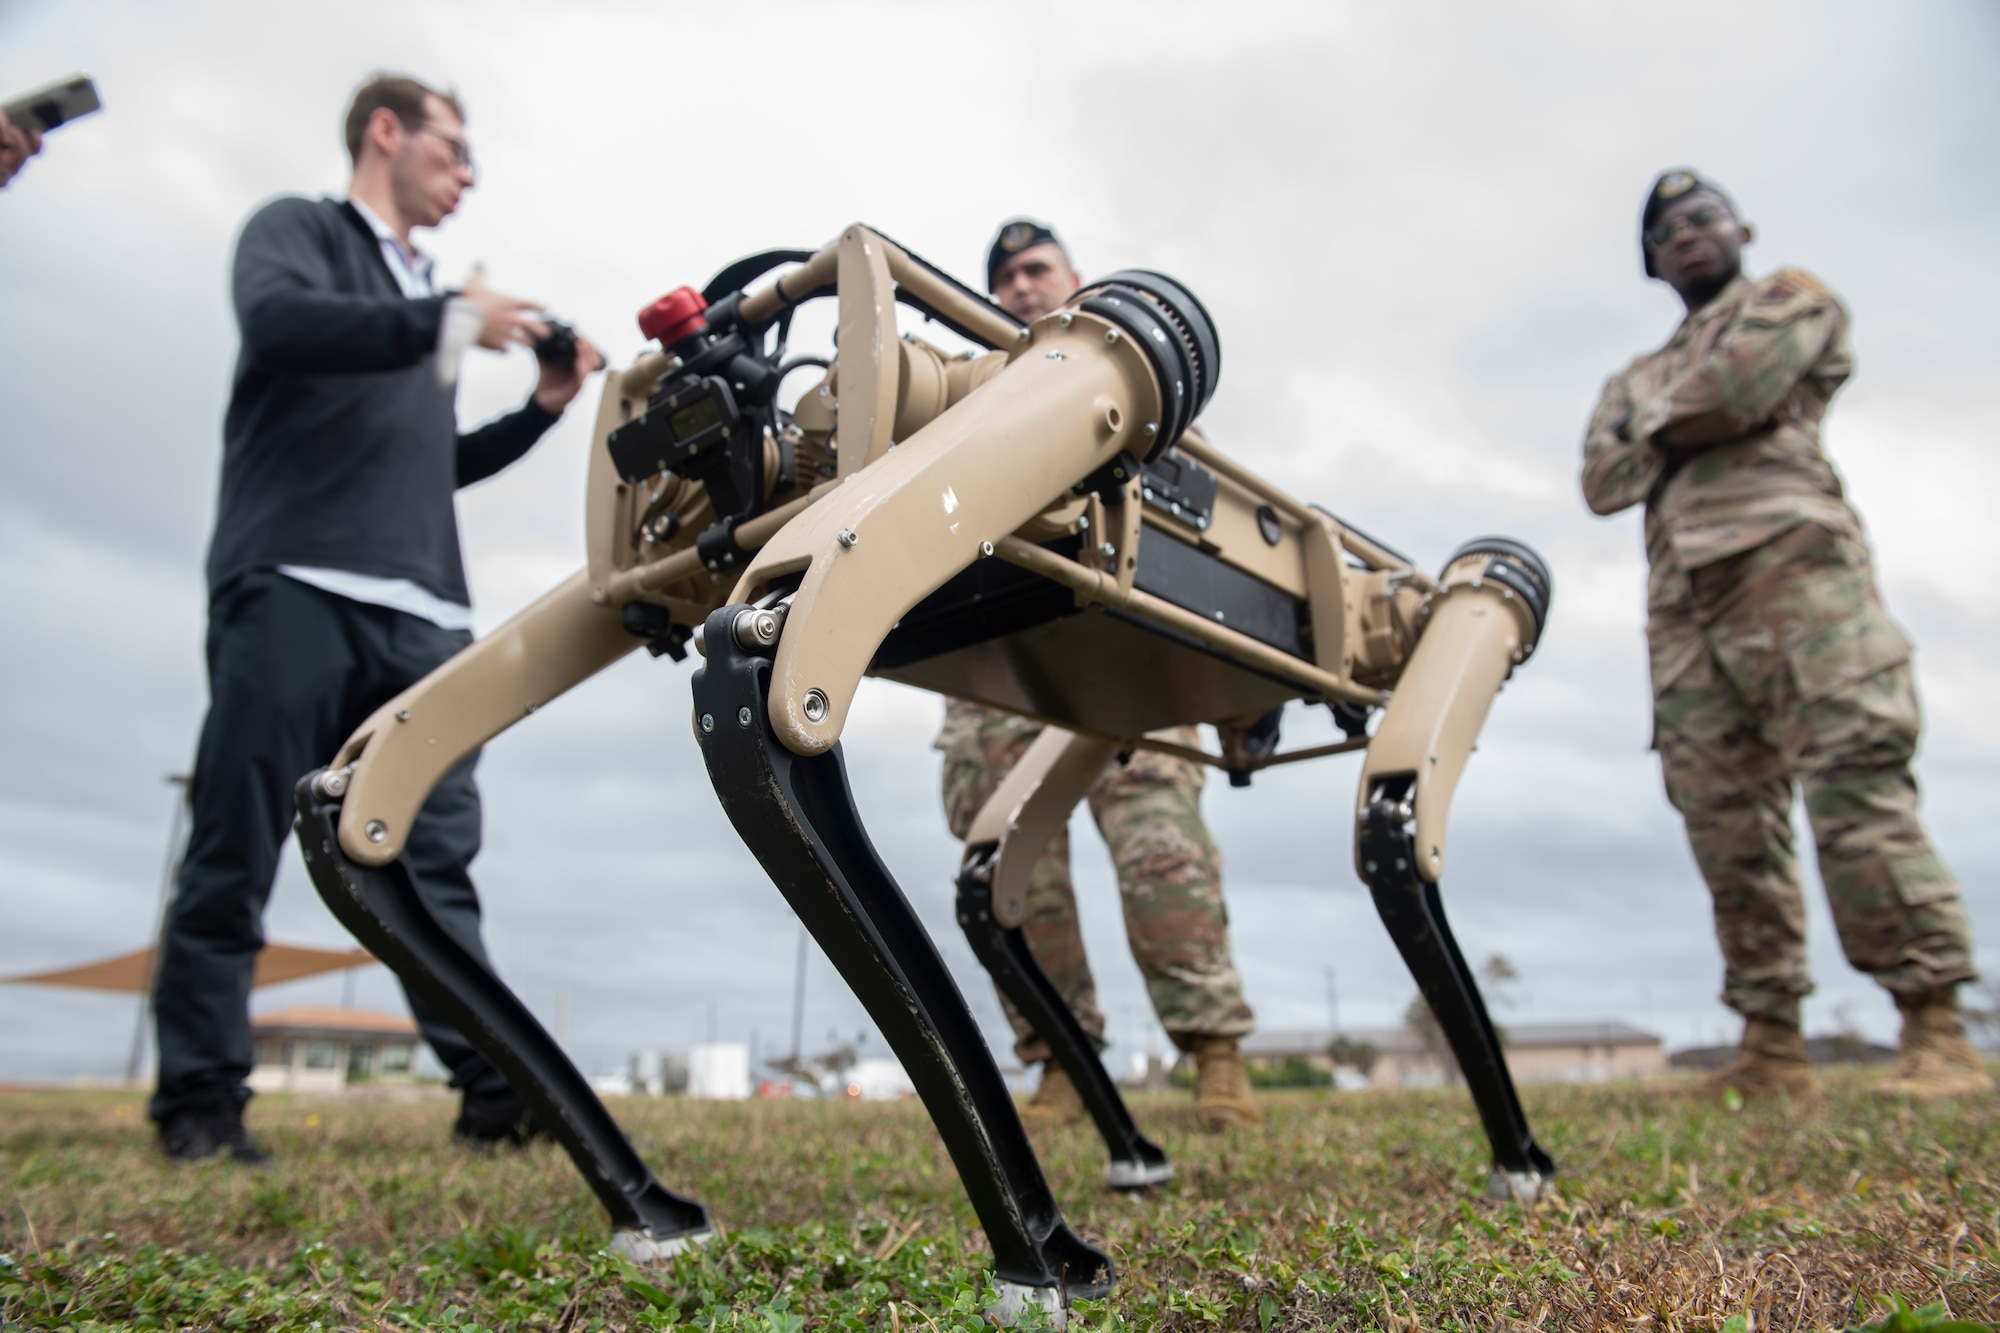 unmanned ground vehicle, men standing in background